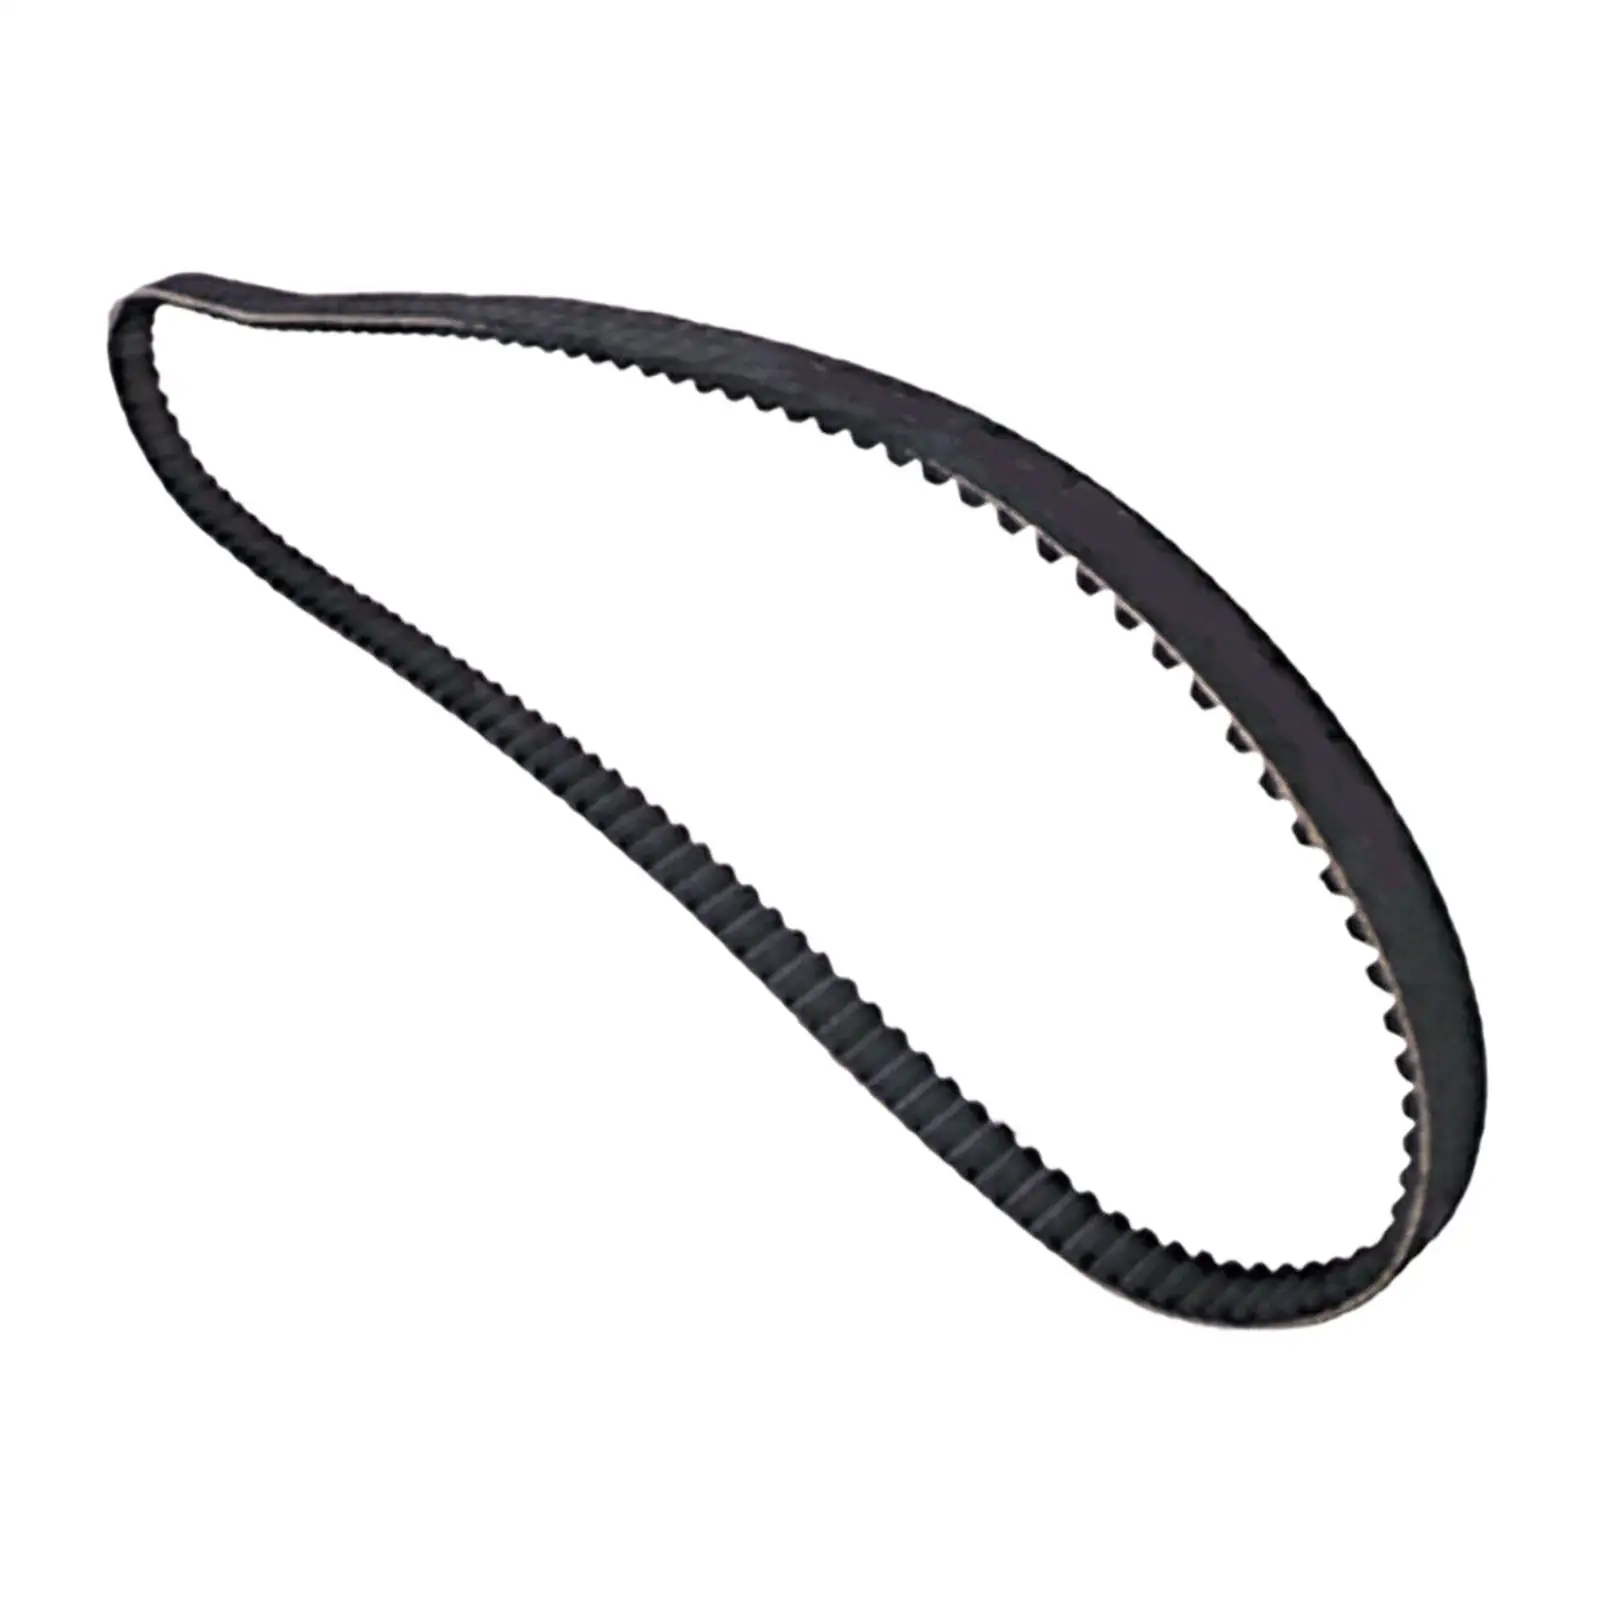 Rear Drive Belt 40015-90 Parabolic Tooth Profile 133 Tooth 1 1/2